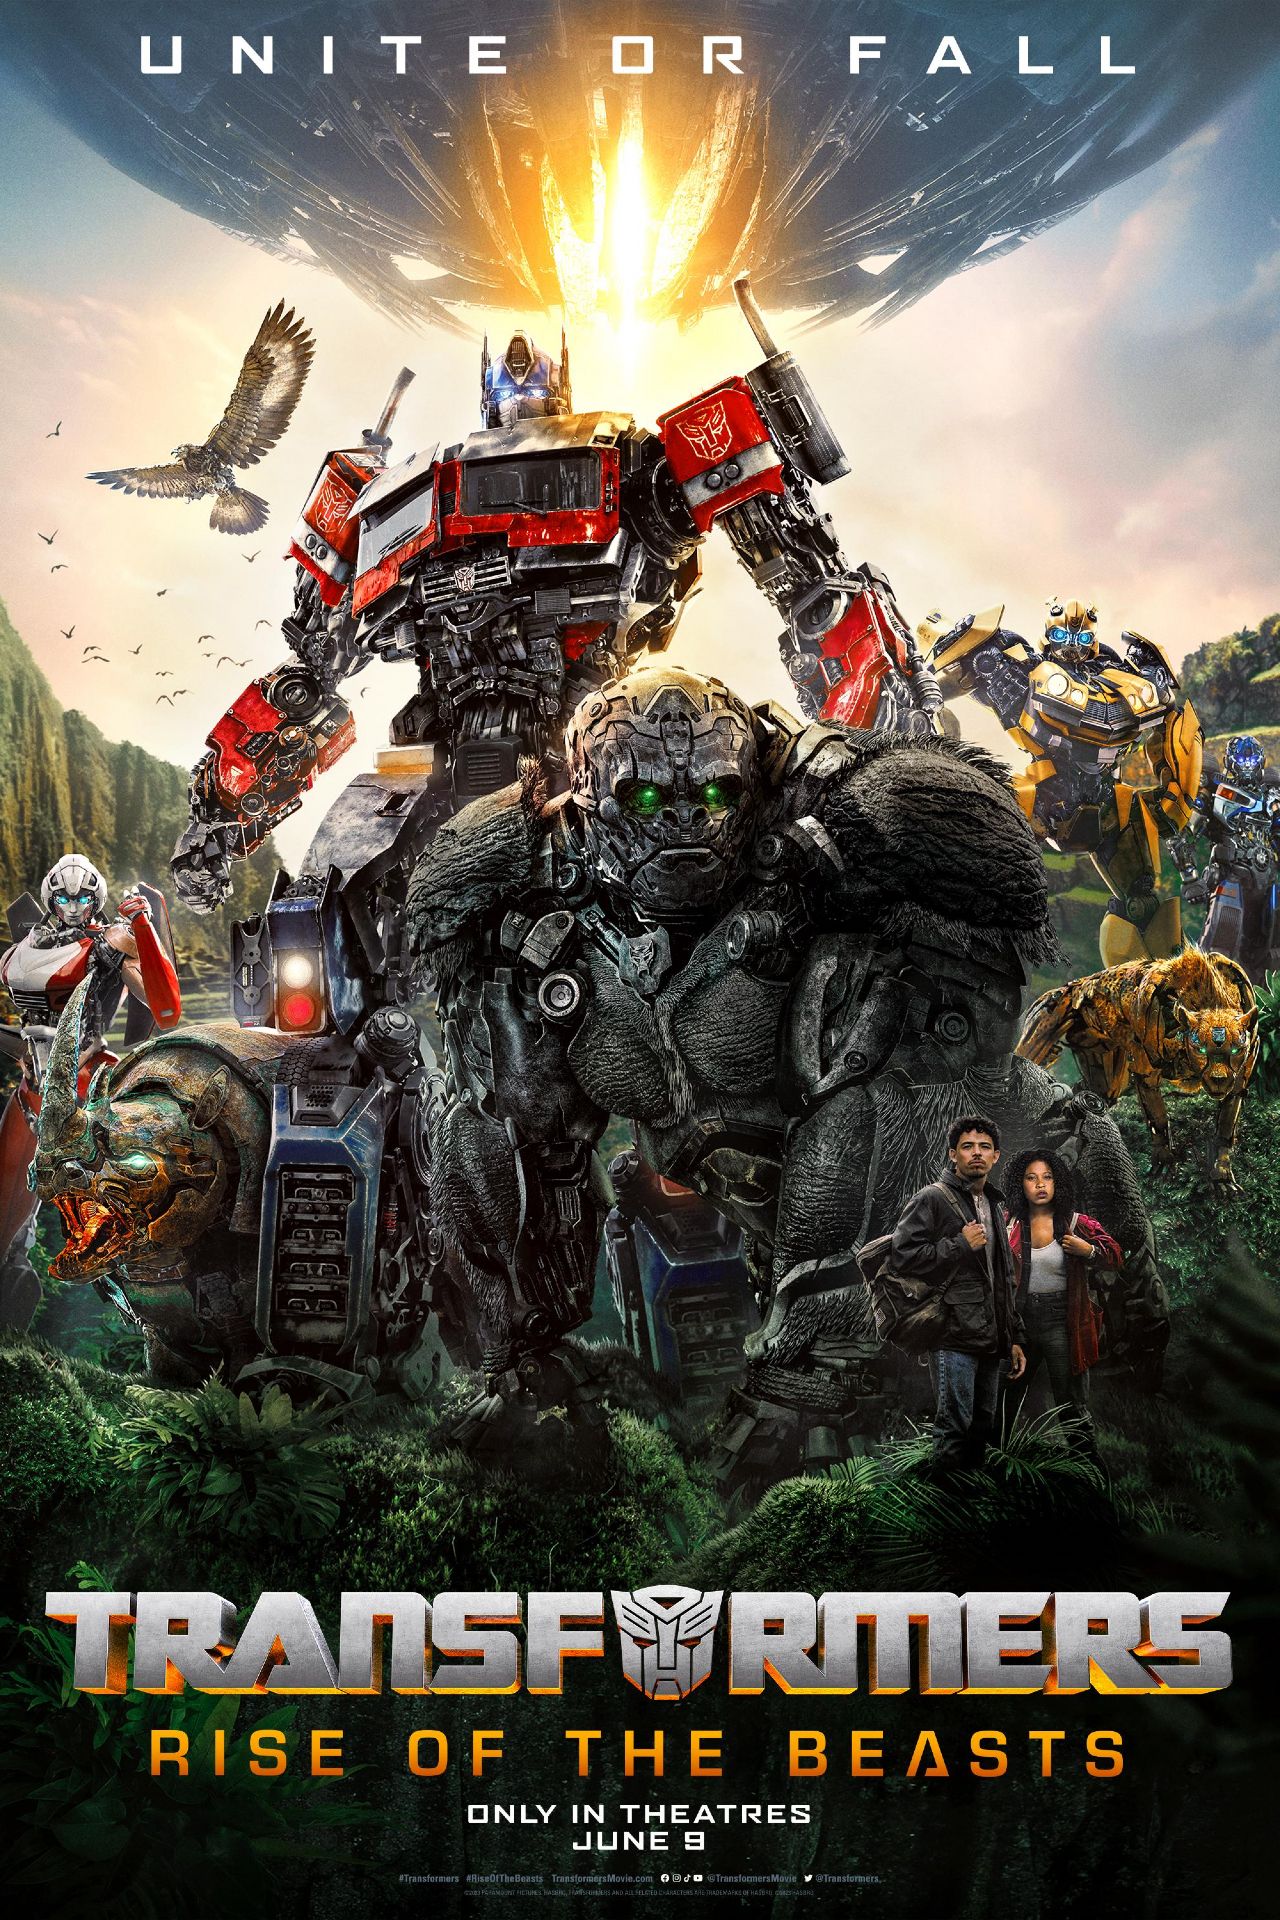 Transformers rise of the beast movie poster